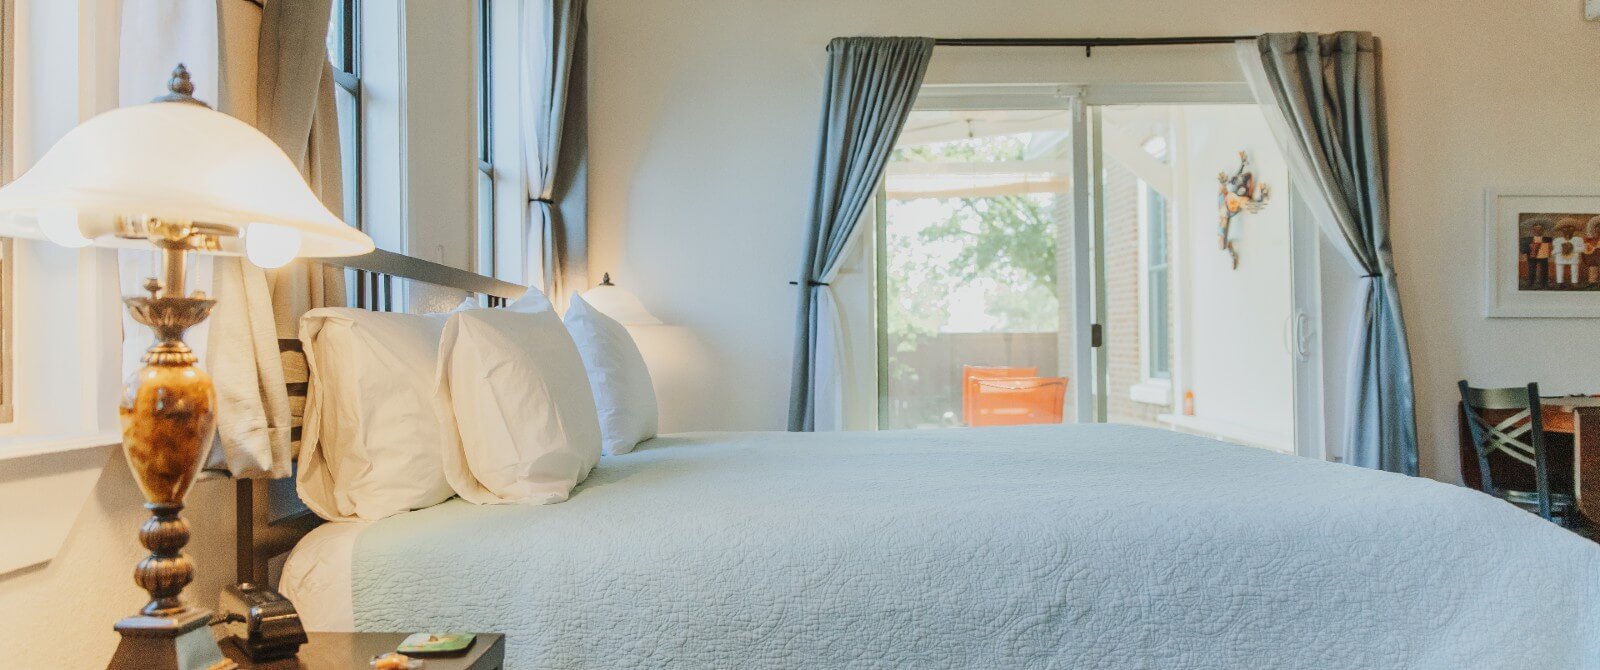 A bright bedroom with a king bed, side tables with lamps and sliding door to an outdoor patio